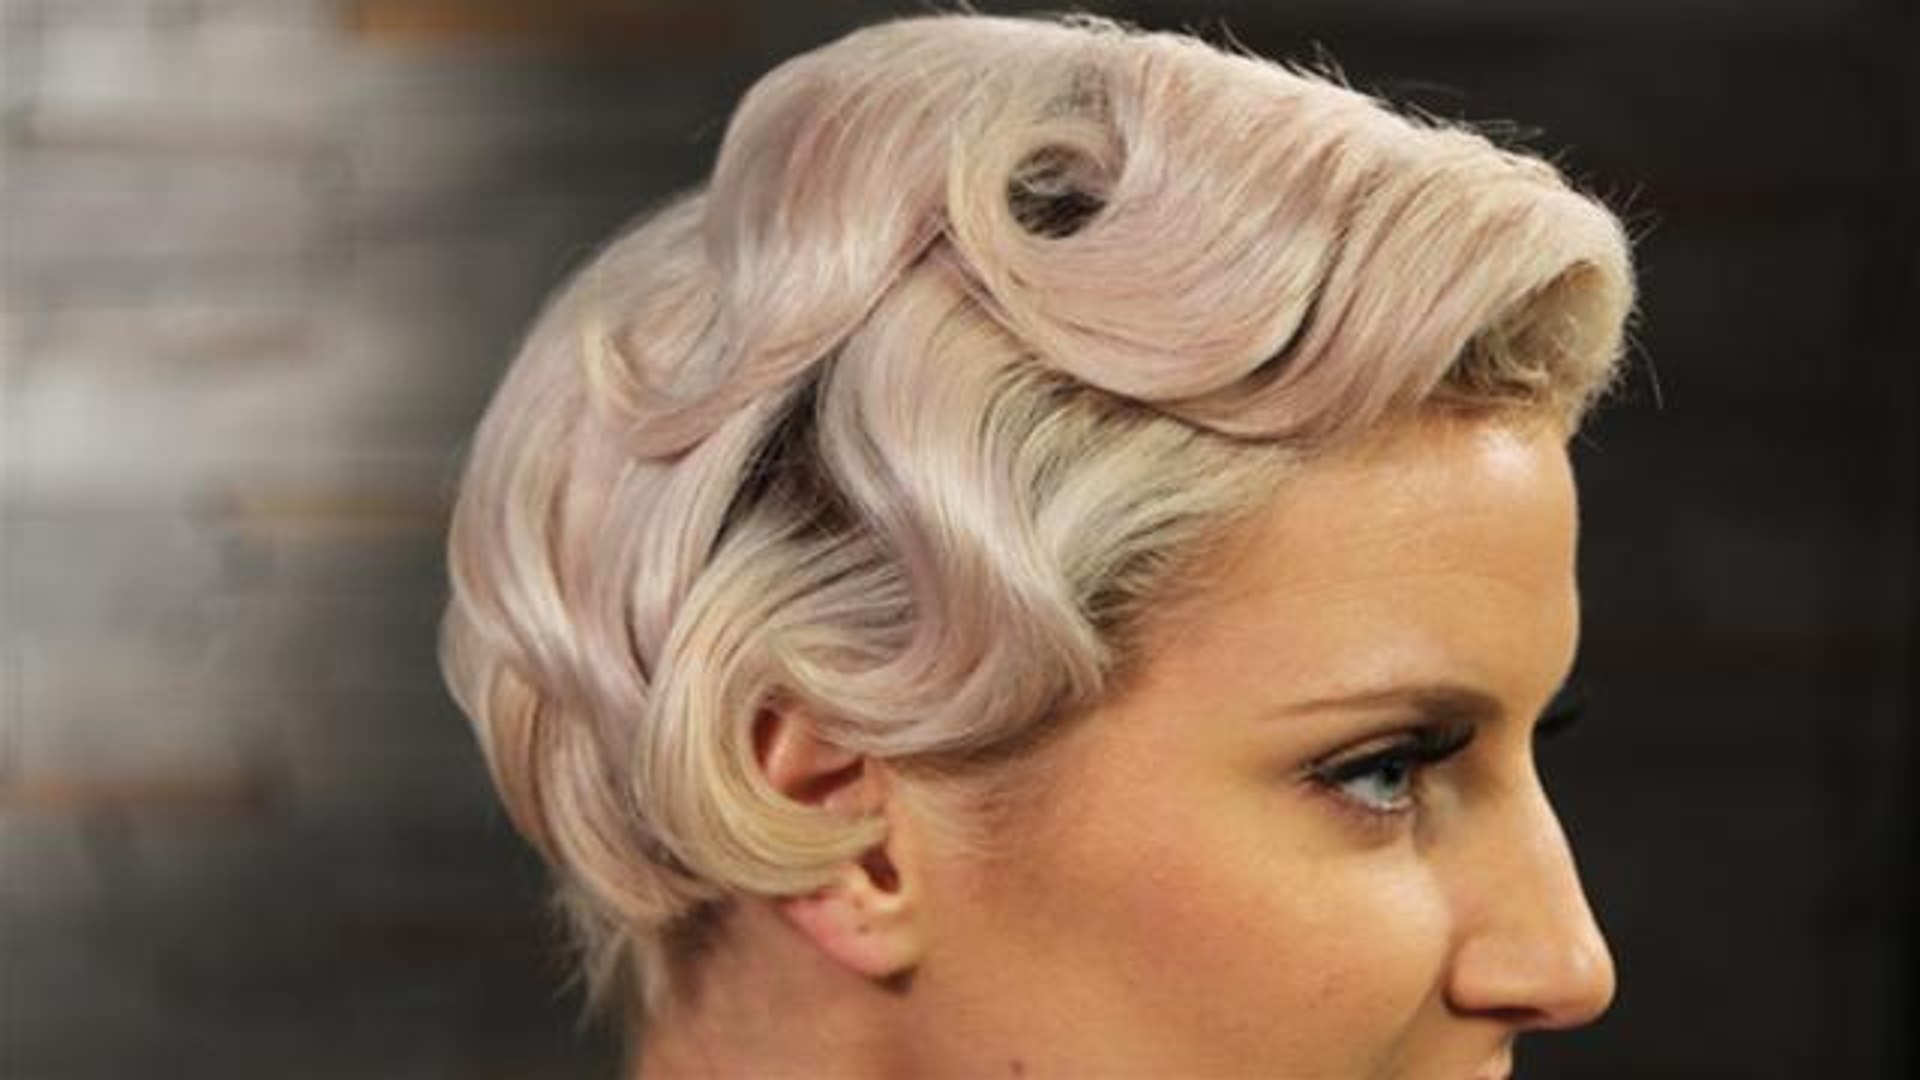 How To Style 1920s Short Hair - video Dailymotion